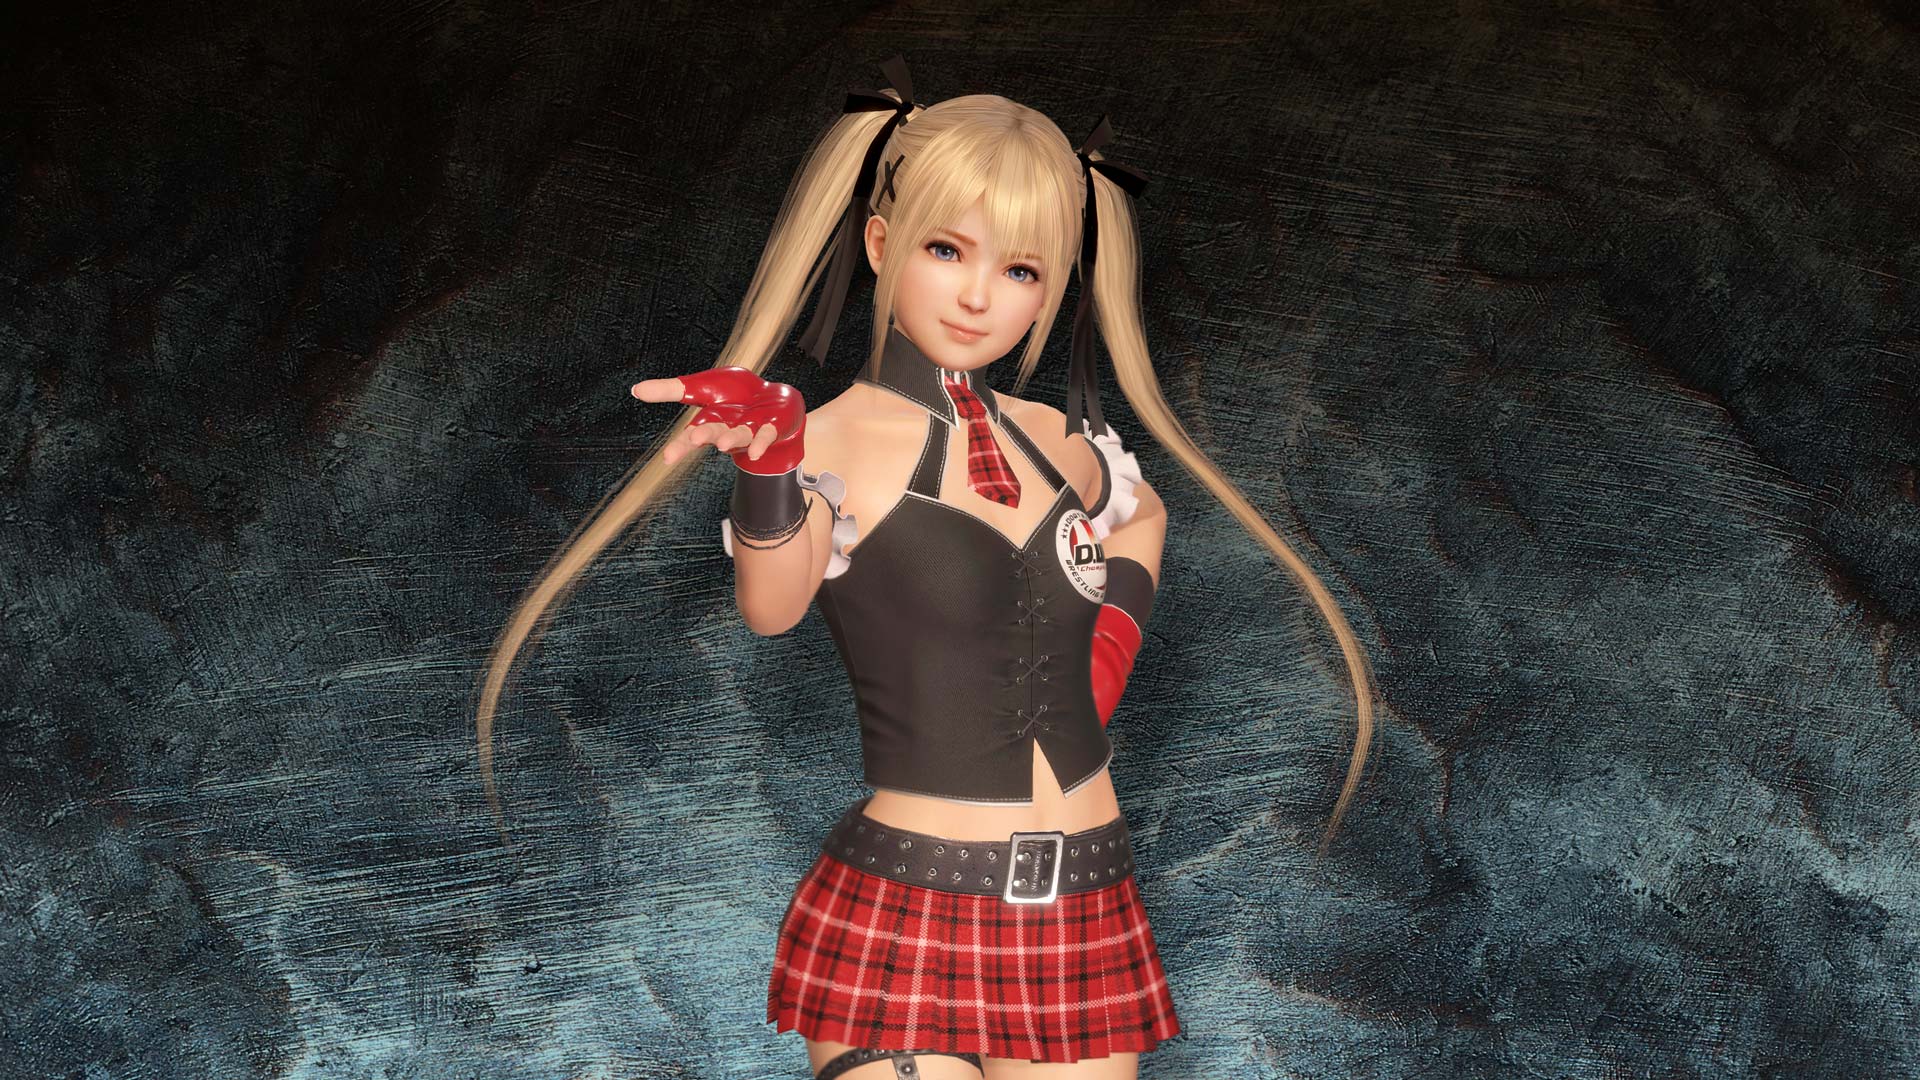 Marie Rose Dead Or Alive 1920x1080